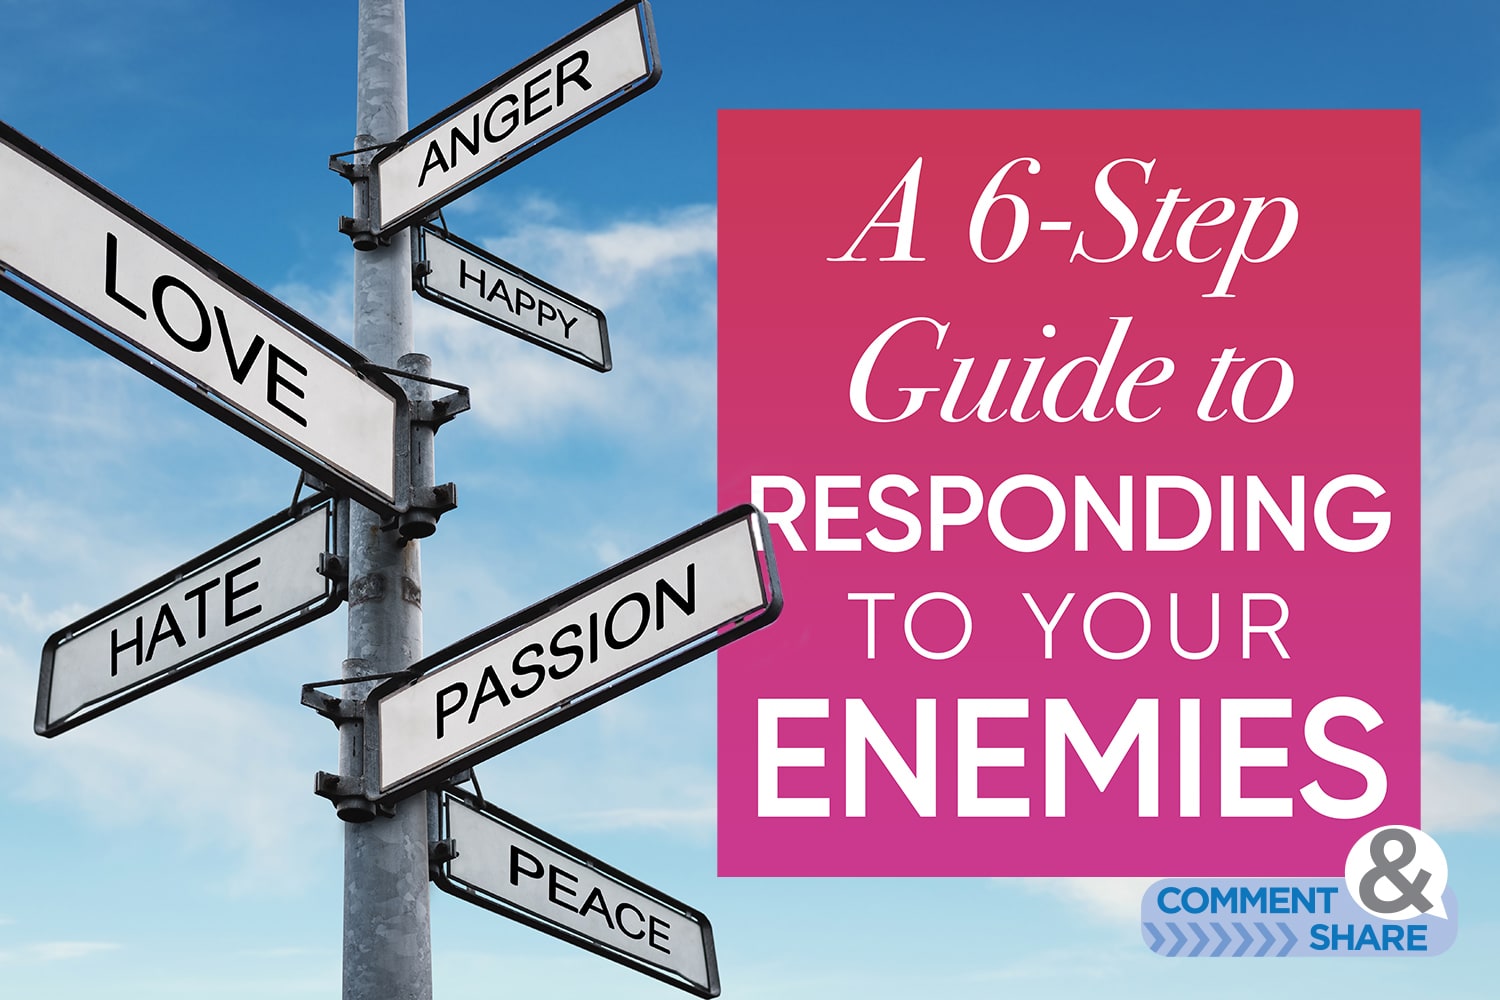 A 6-Step Guide to Responding to Your Enemies